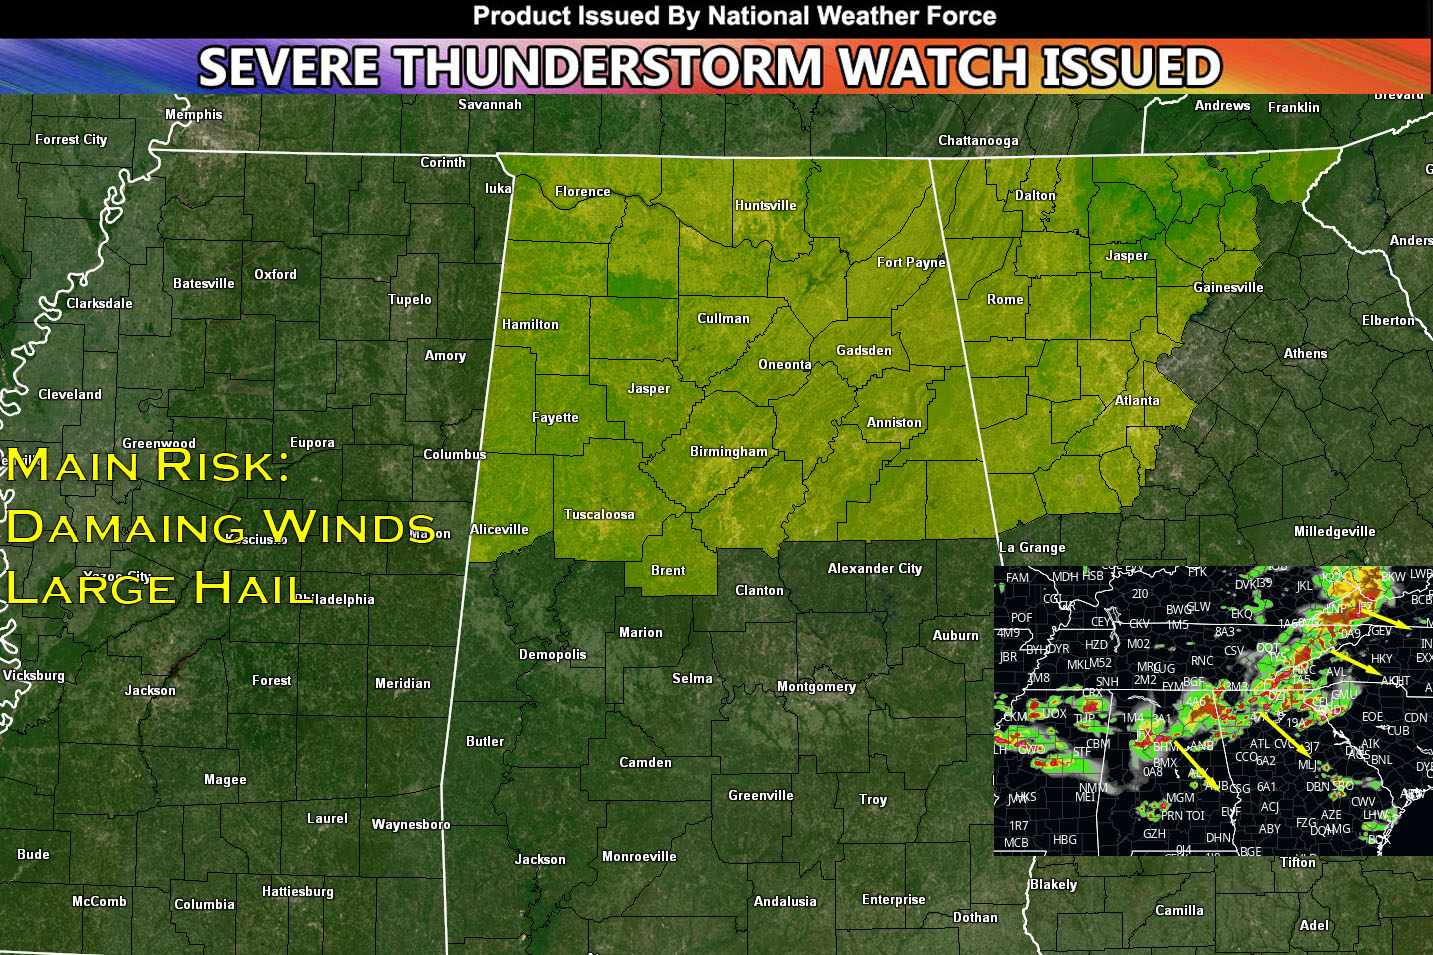 Severe Thunderstorm Watch Issued for Northcentral Alabama & Northcentral Georgia for This Evening Through 1am EDT